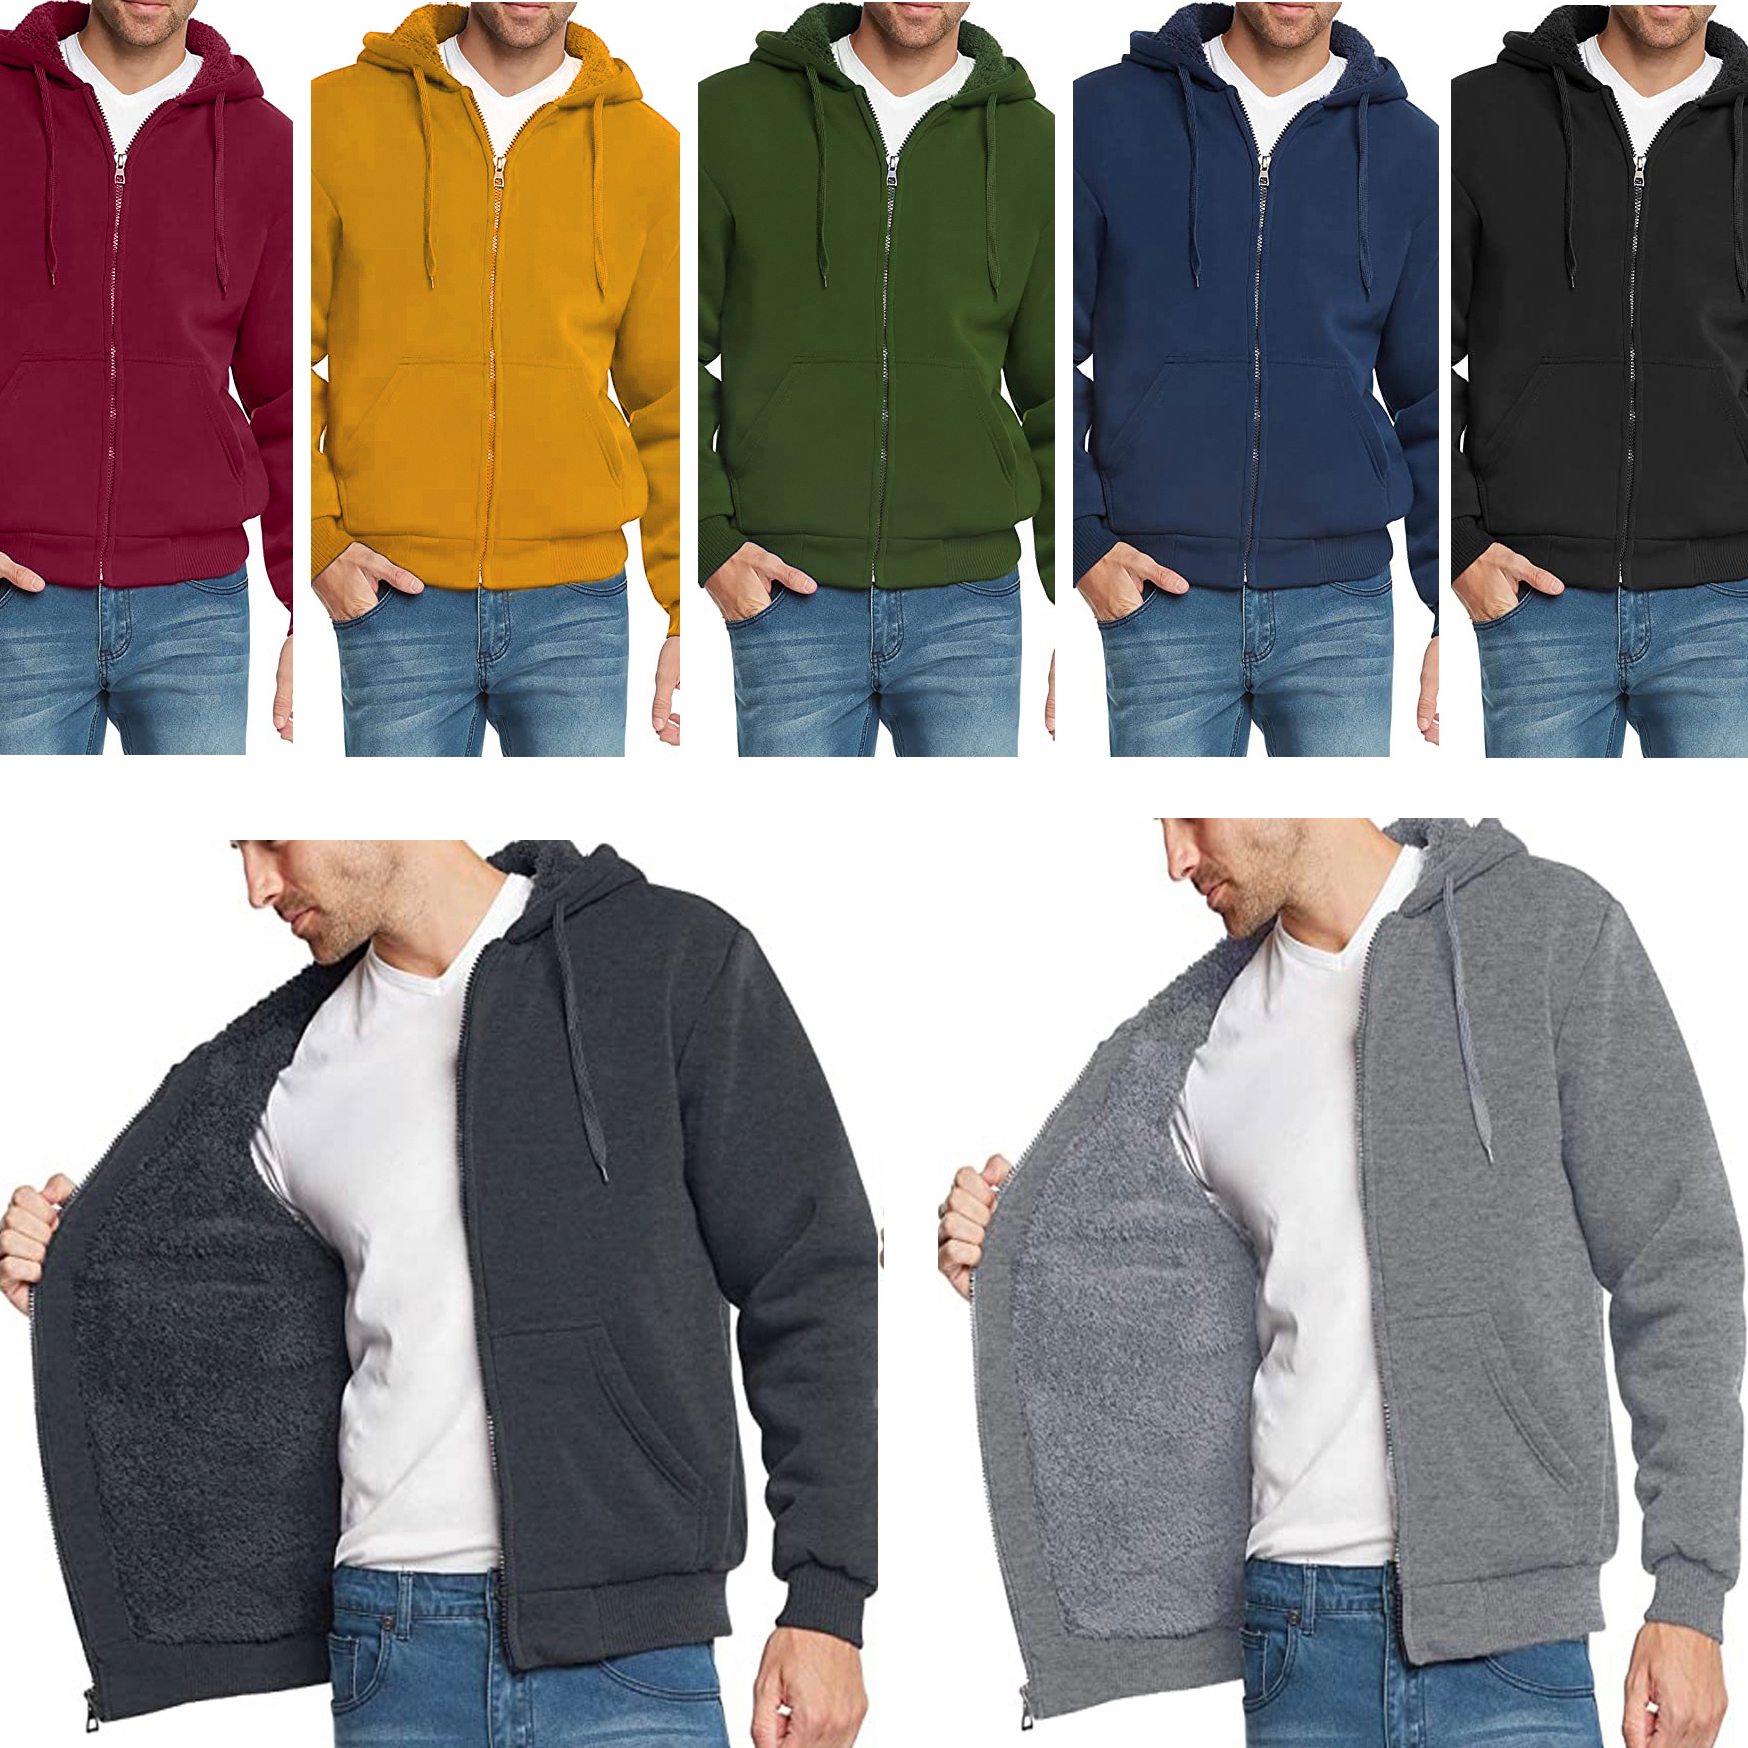 Men's Extra-Thick Sherpa Lined Fleece Hoodie (Big & Tall Sizes Available) - Charcoal, Medium